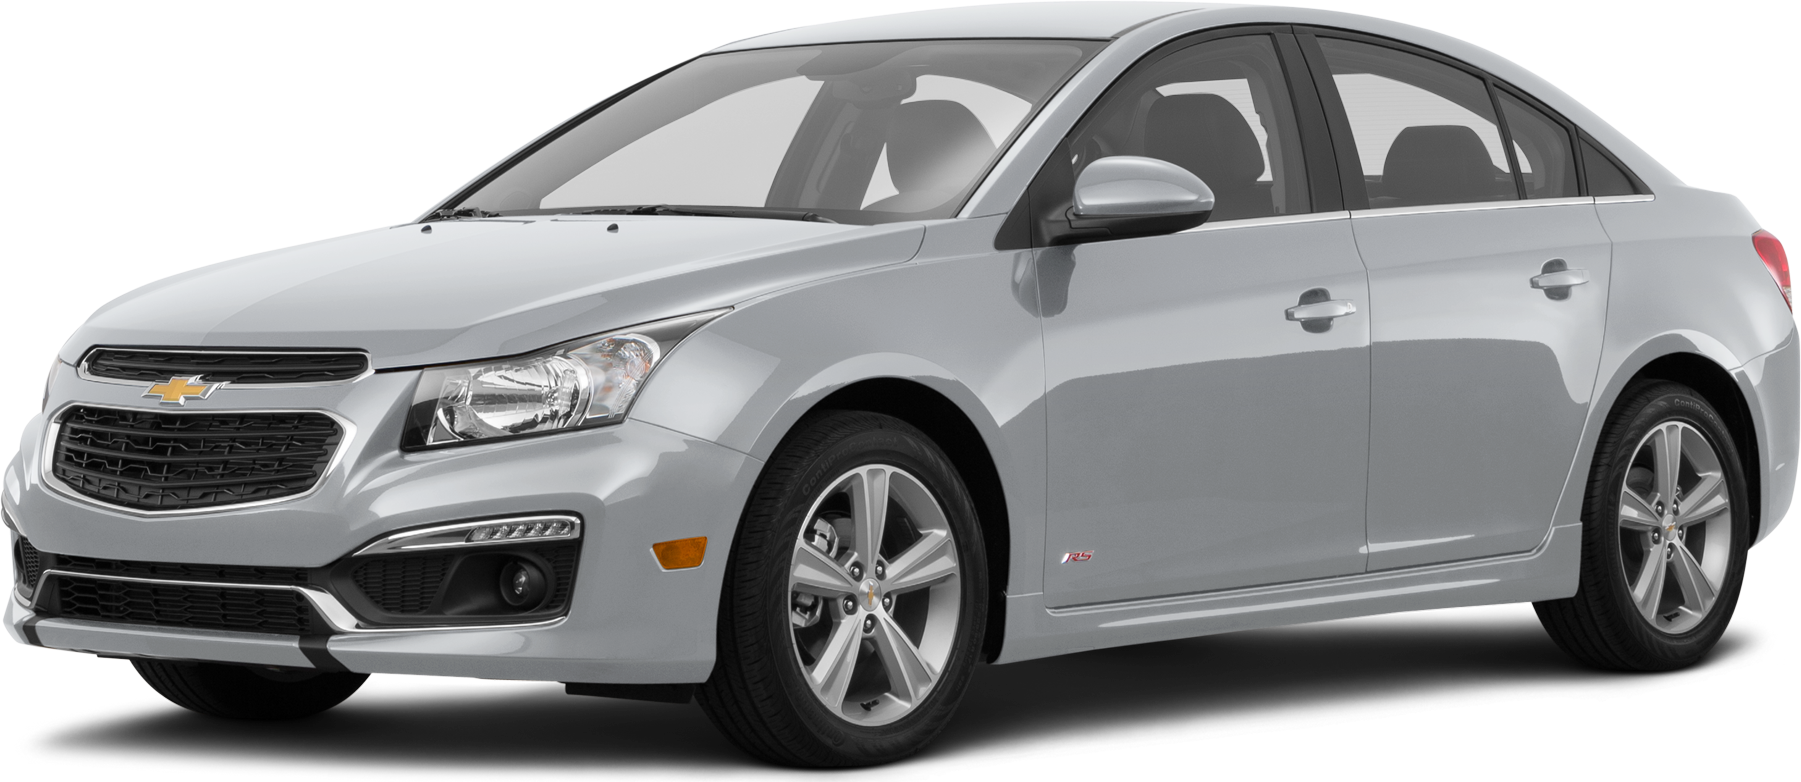 2016 Chevrolet Cruze Limited Price, Value, Ratings & Reviews